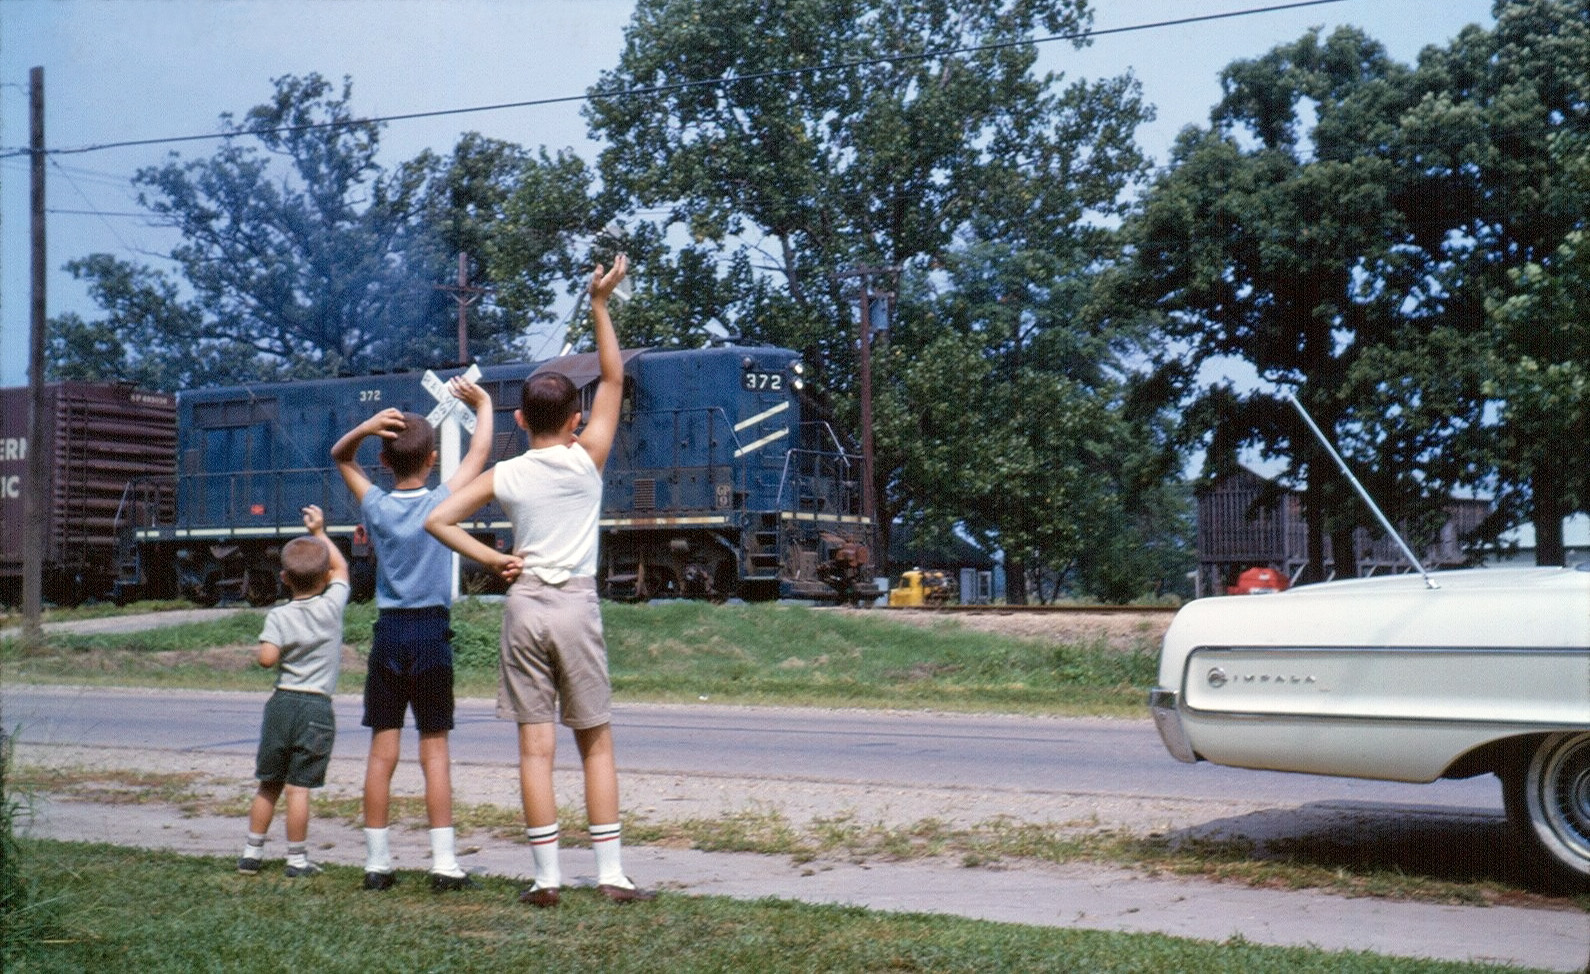 My two younger brothers and myself waving at the train which passed by twice a day on the track across the road from our grandparent's home. Morehouse, Missouri, 1967.  Kodachrome slide. Any advice on optimal methods to scan slides would be appreciated! View full size.